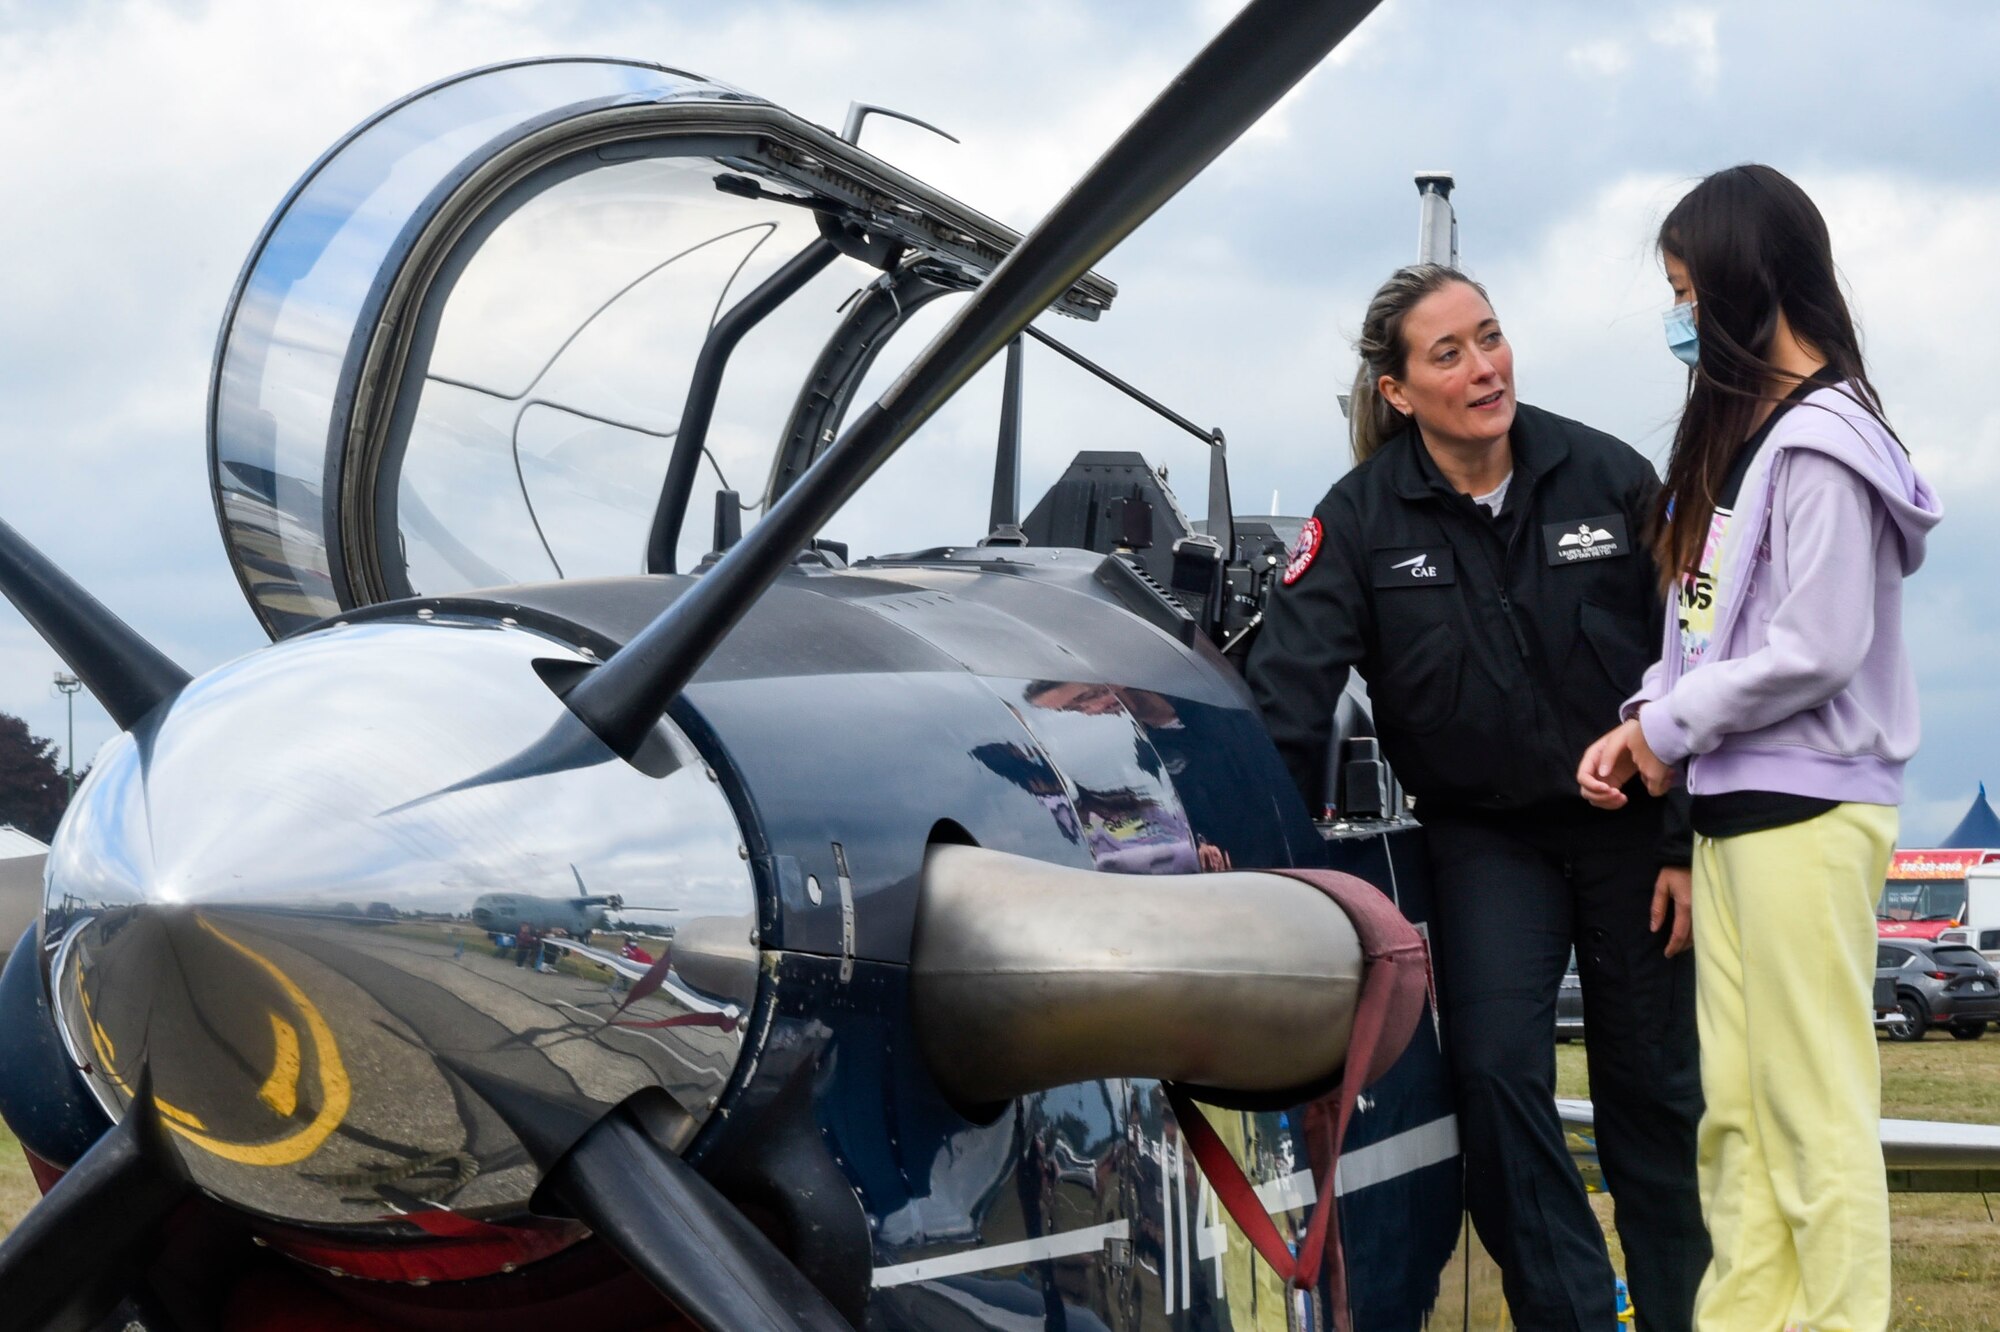 A Royal Canadian Air Force Instructor Pilot teaches a young girl about a trainer aircraft during “The Sky’s No Limit: Girls Fly Too” event in Abbotsford, Canada, Oct. 3, 2021.The event gave Airmen from Fairchild an opportunity to empower young ladies, and inspire them to pursue various career opportunities. (U.S. Air Force photo by 2nd Lt. Michelle Chang)